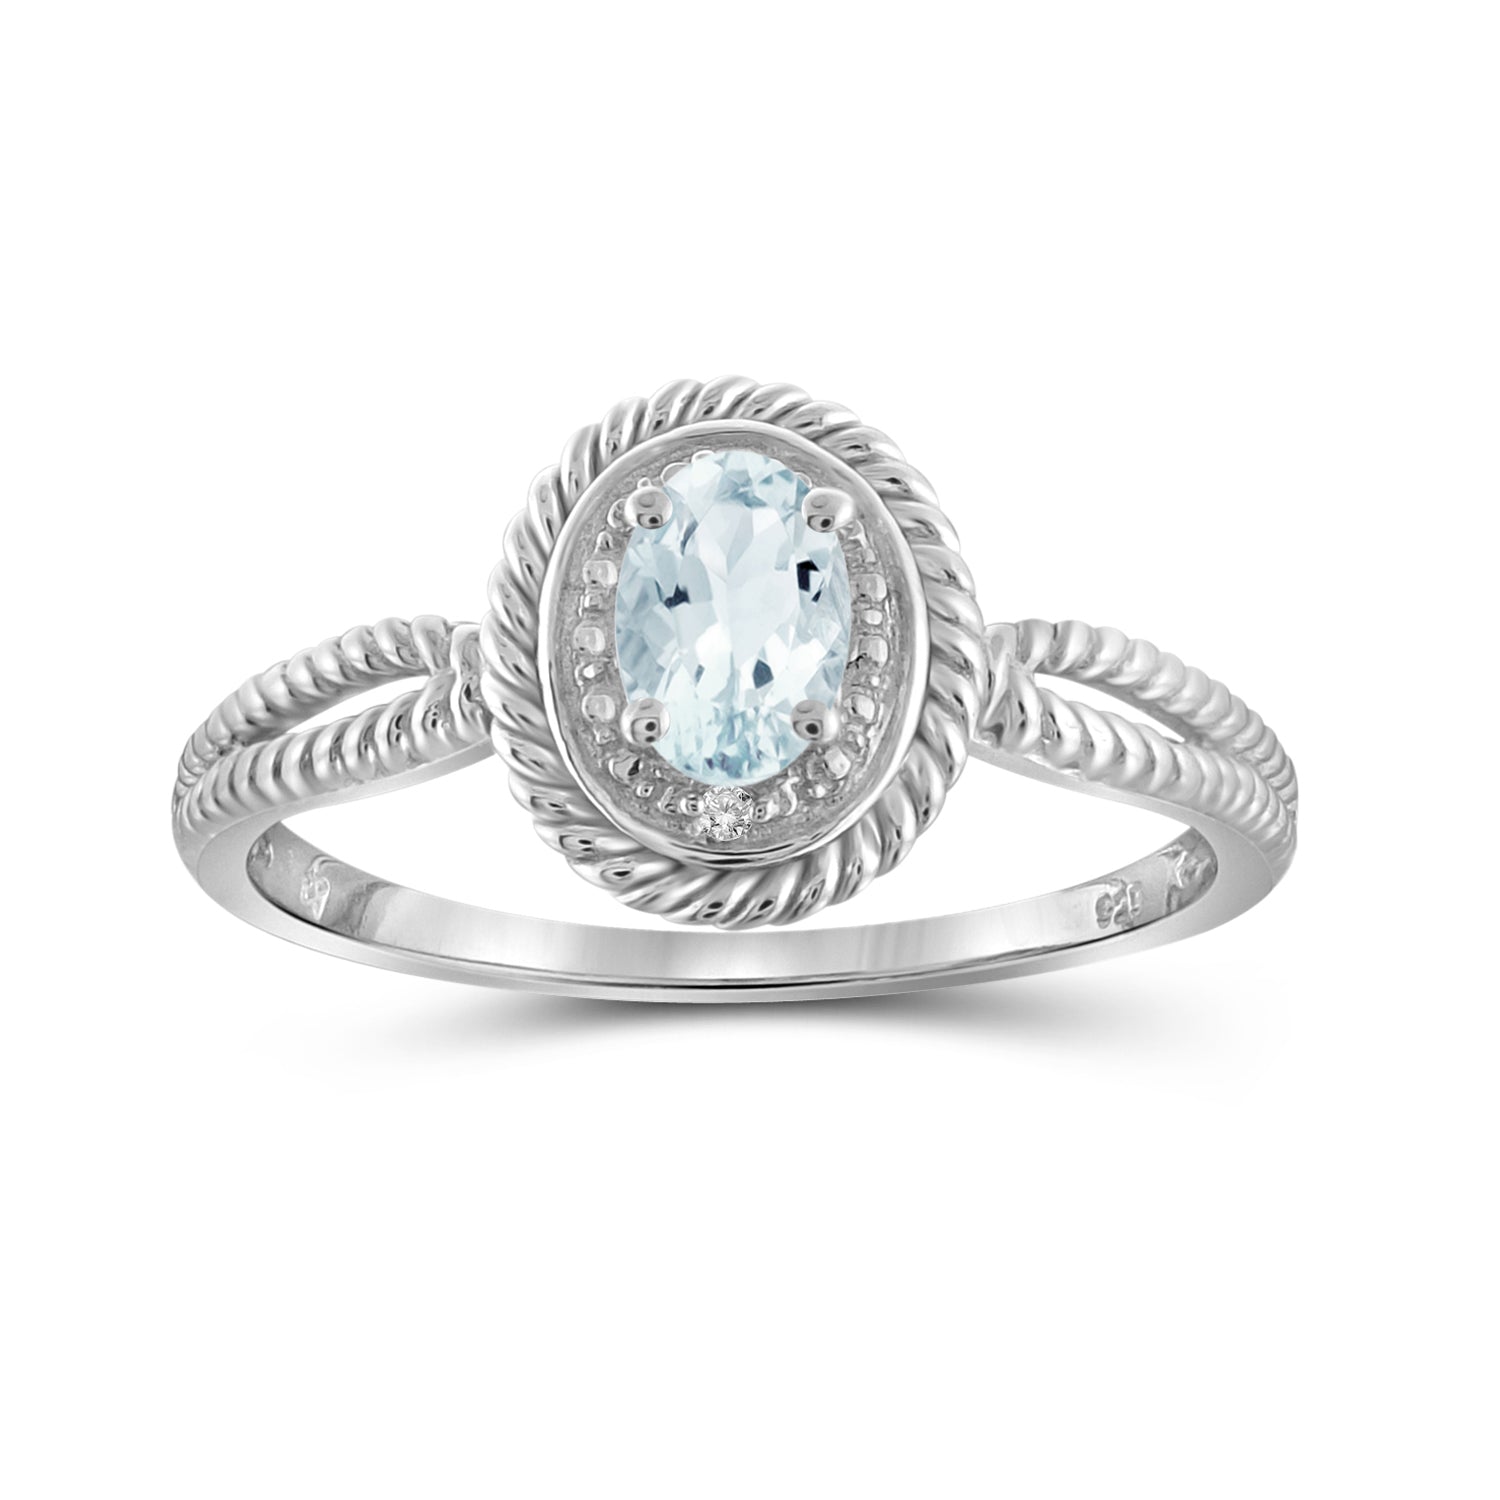 Aquamarine Ring Birthstone Jewelry – 0.50 Carat Aquamarine 0.925 Sterling Silver Ring Jewelry with White Diamond Accent – Gemstone Rings with Hypoallergenic 0.925 Sterling Silver Band